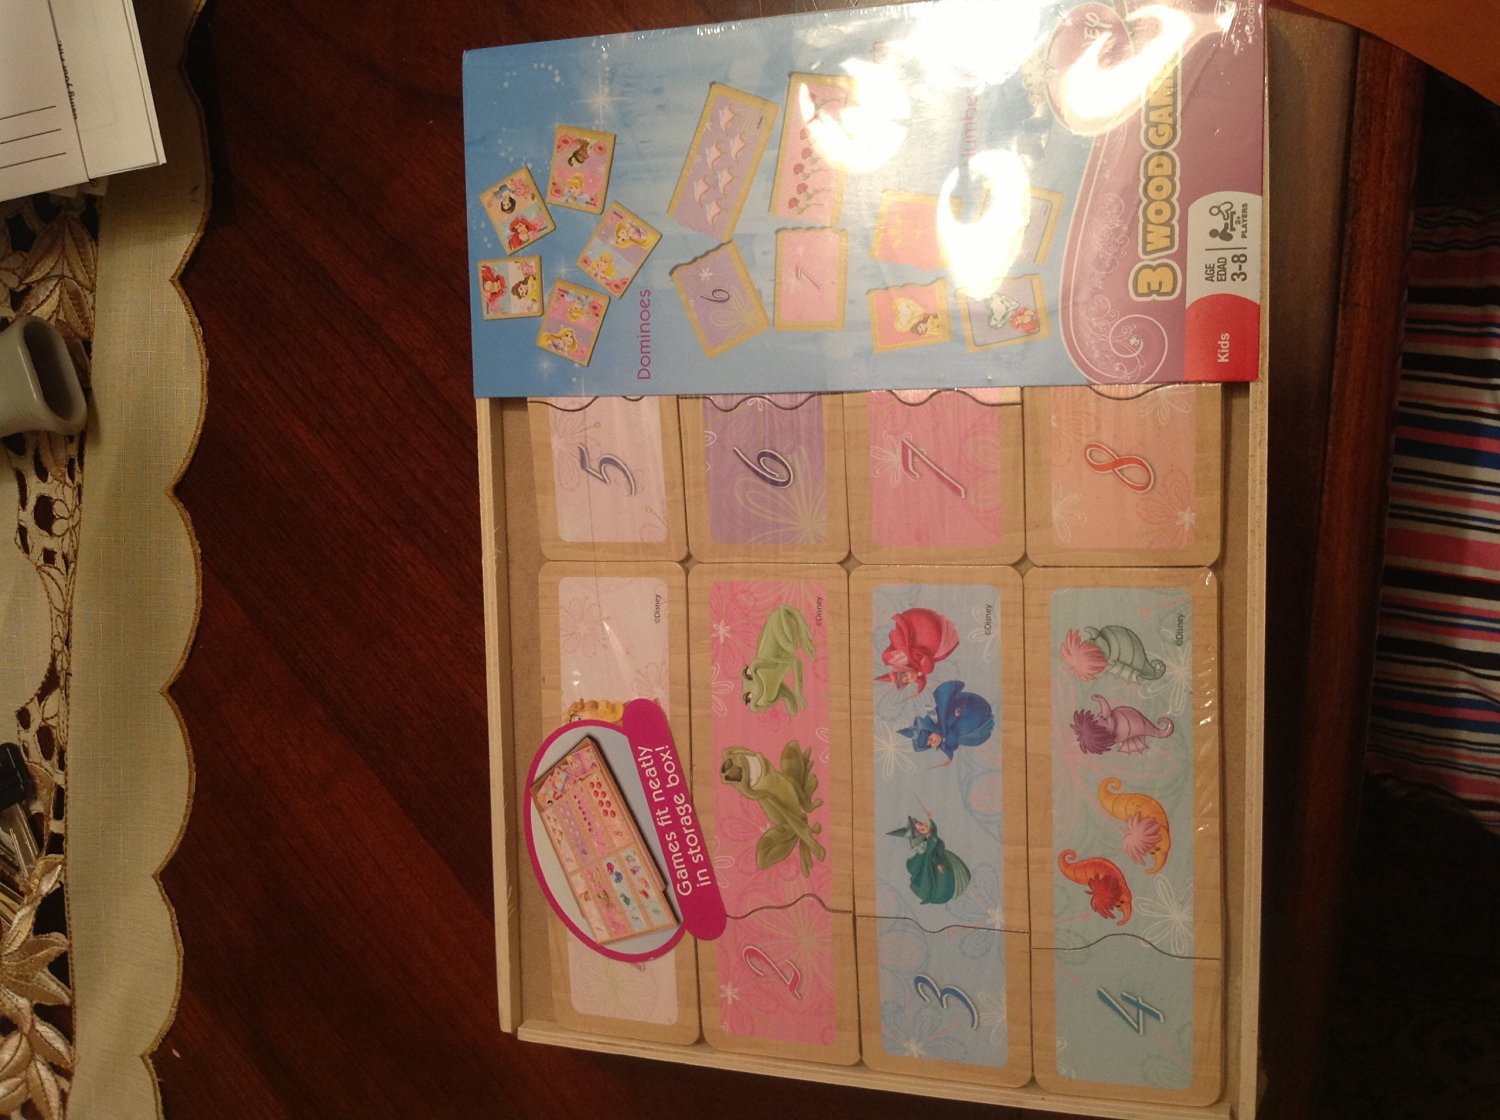 Disney Princess - 3 WOOD GAMES including Dominoes, Number Match, Color Match. Age 3-8